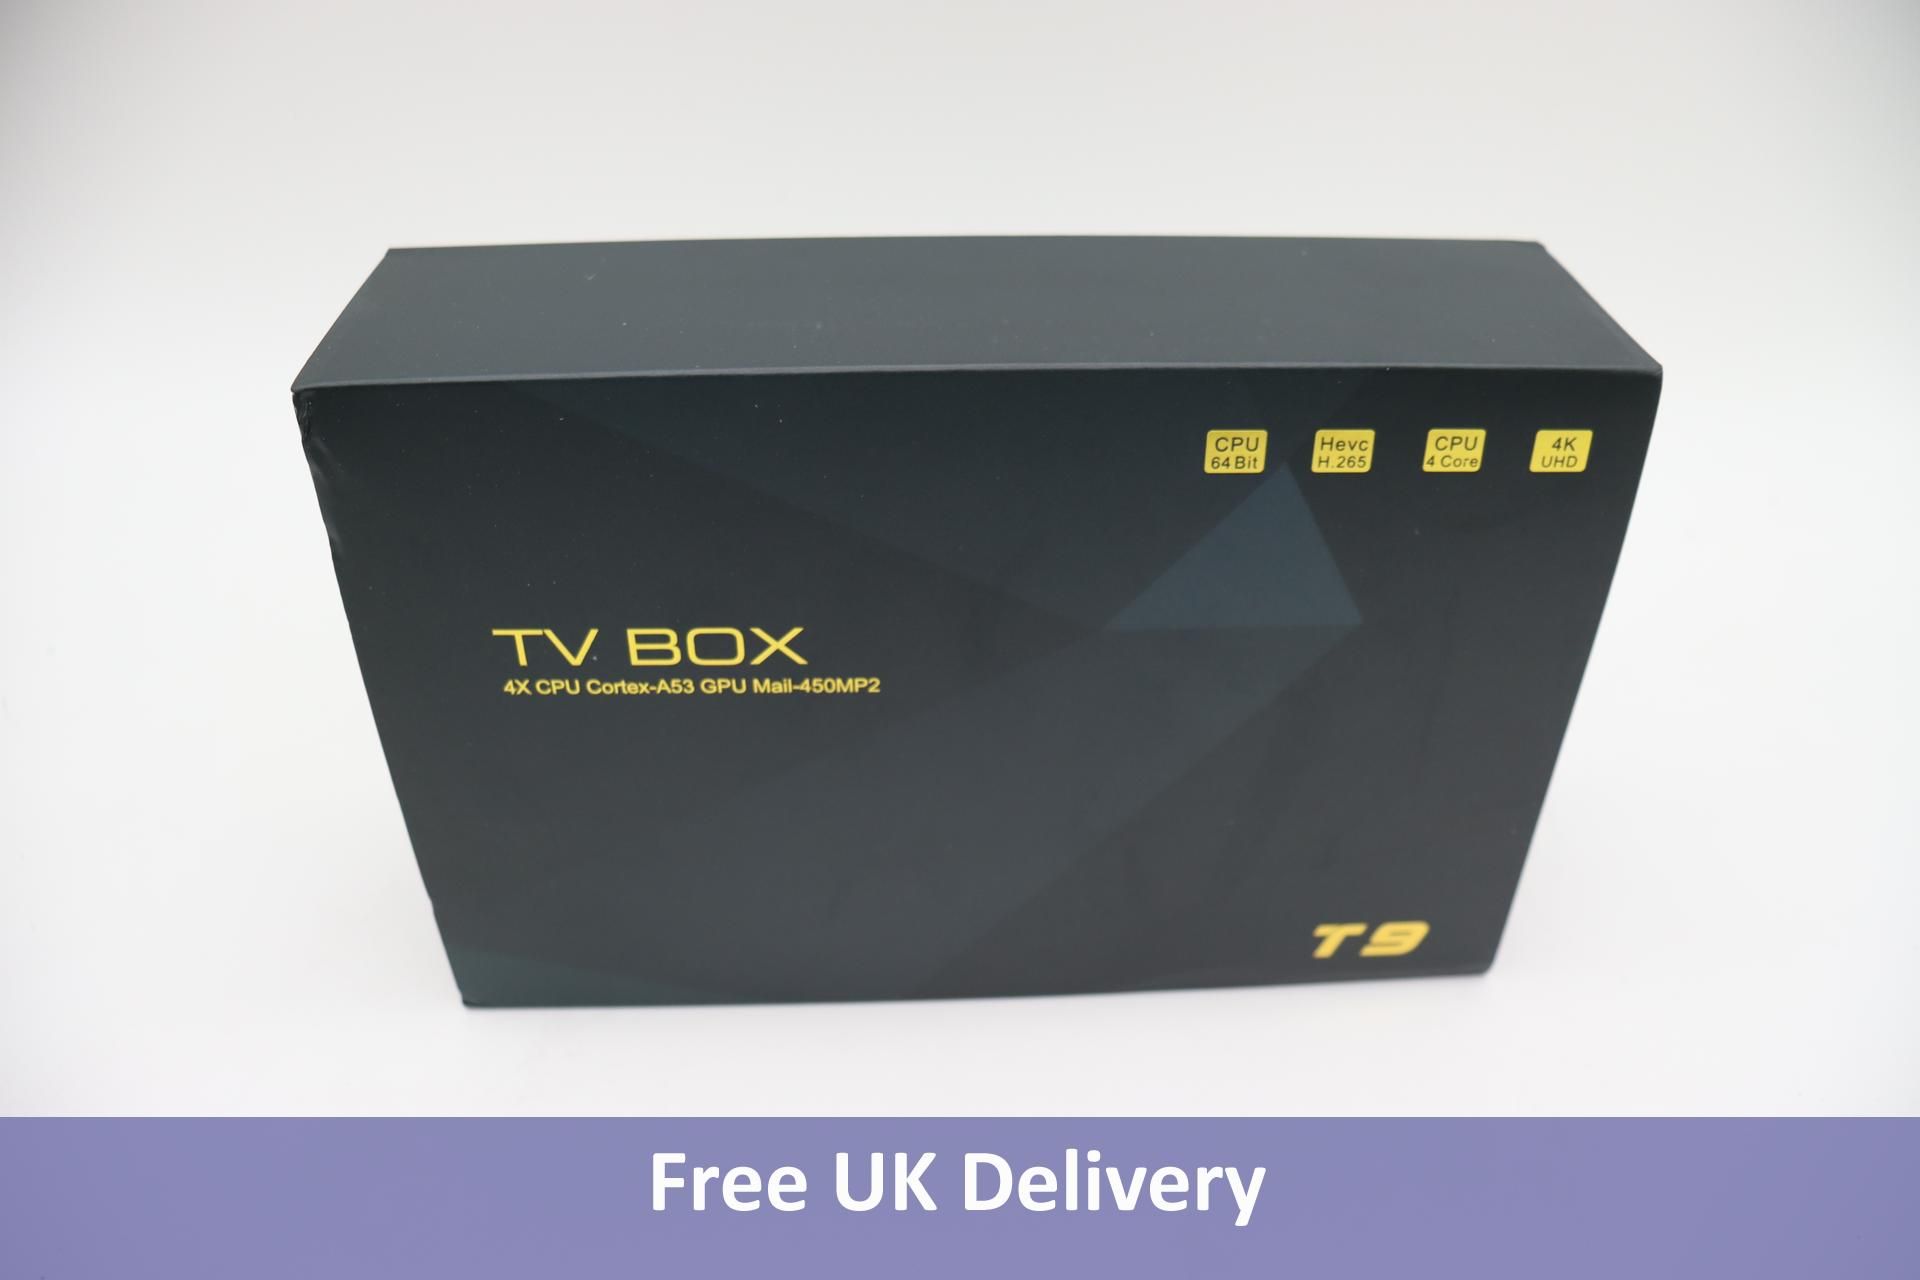 Fifty-one Smart Your Life Android TV Box, Model TX 9